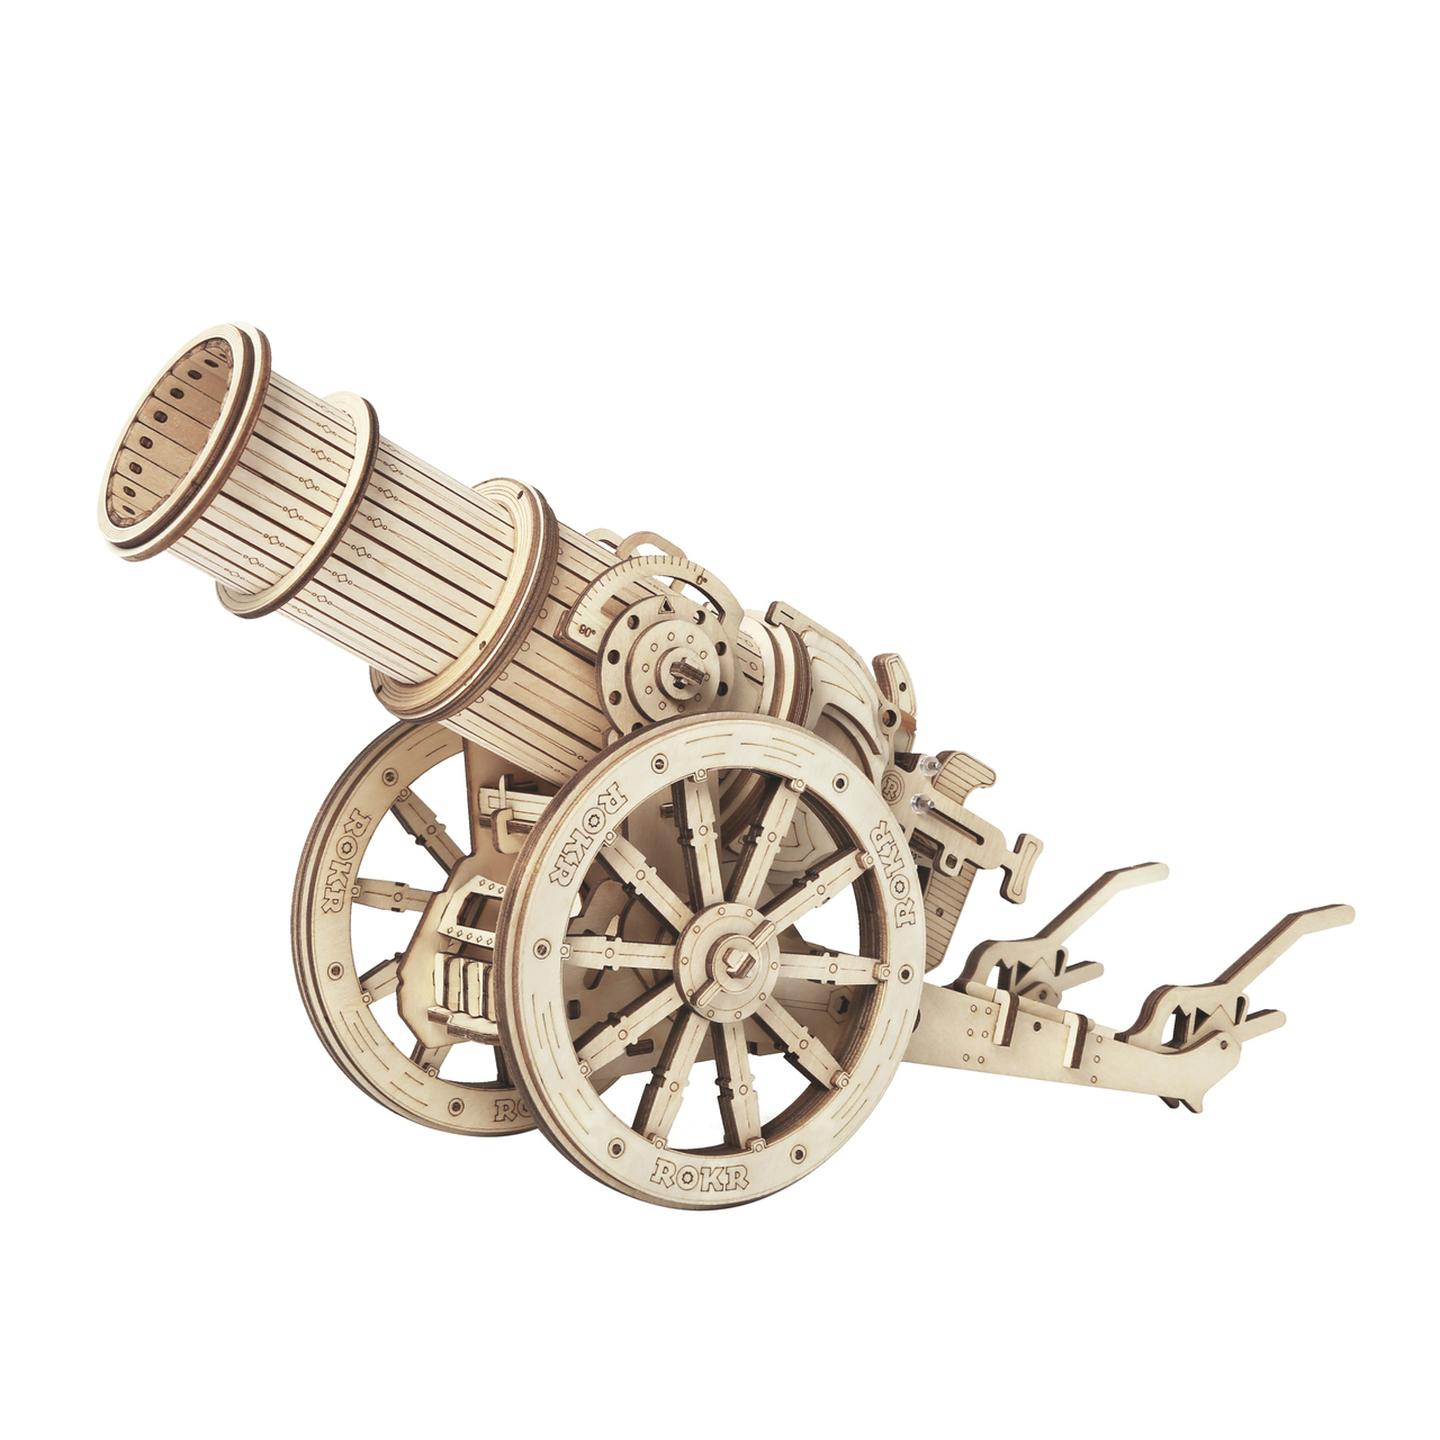 Medieval Cannon Wooden Construction Kit